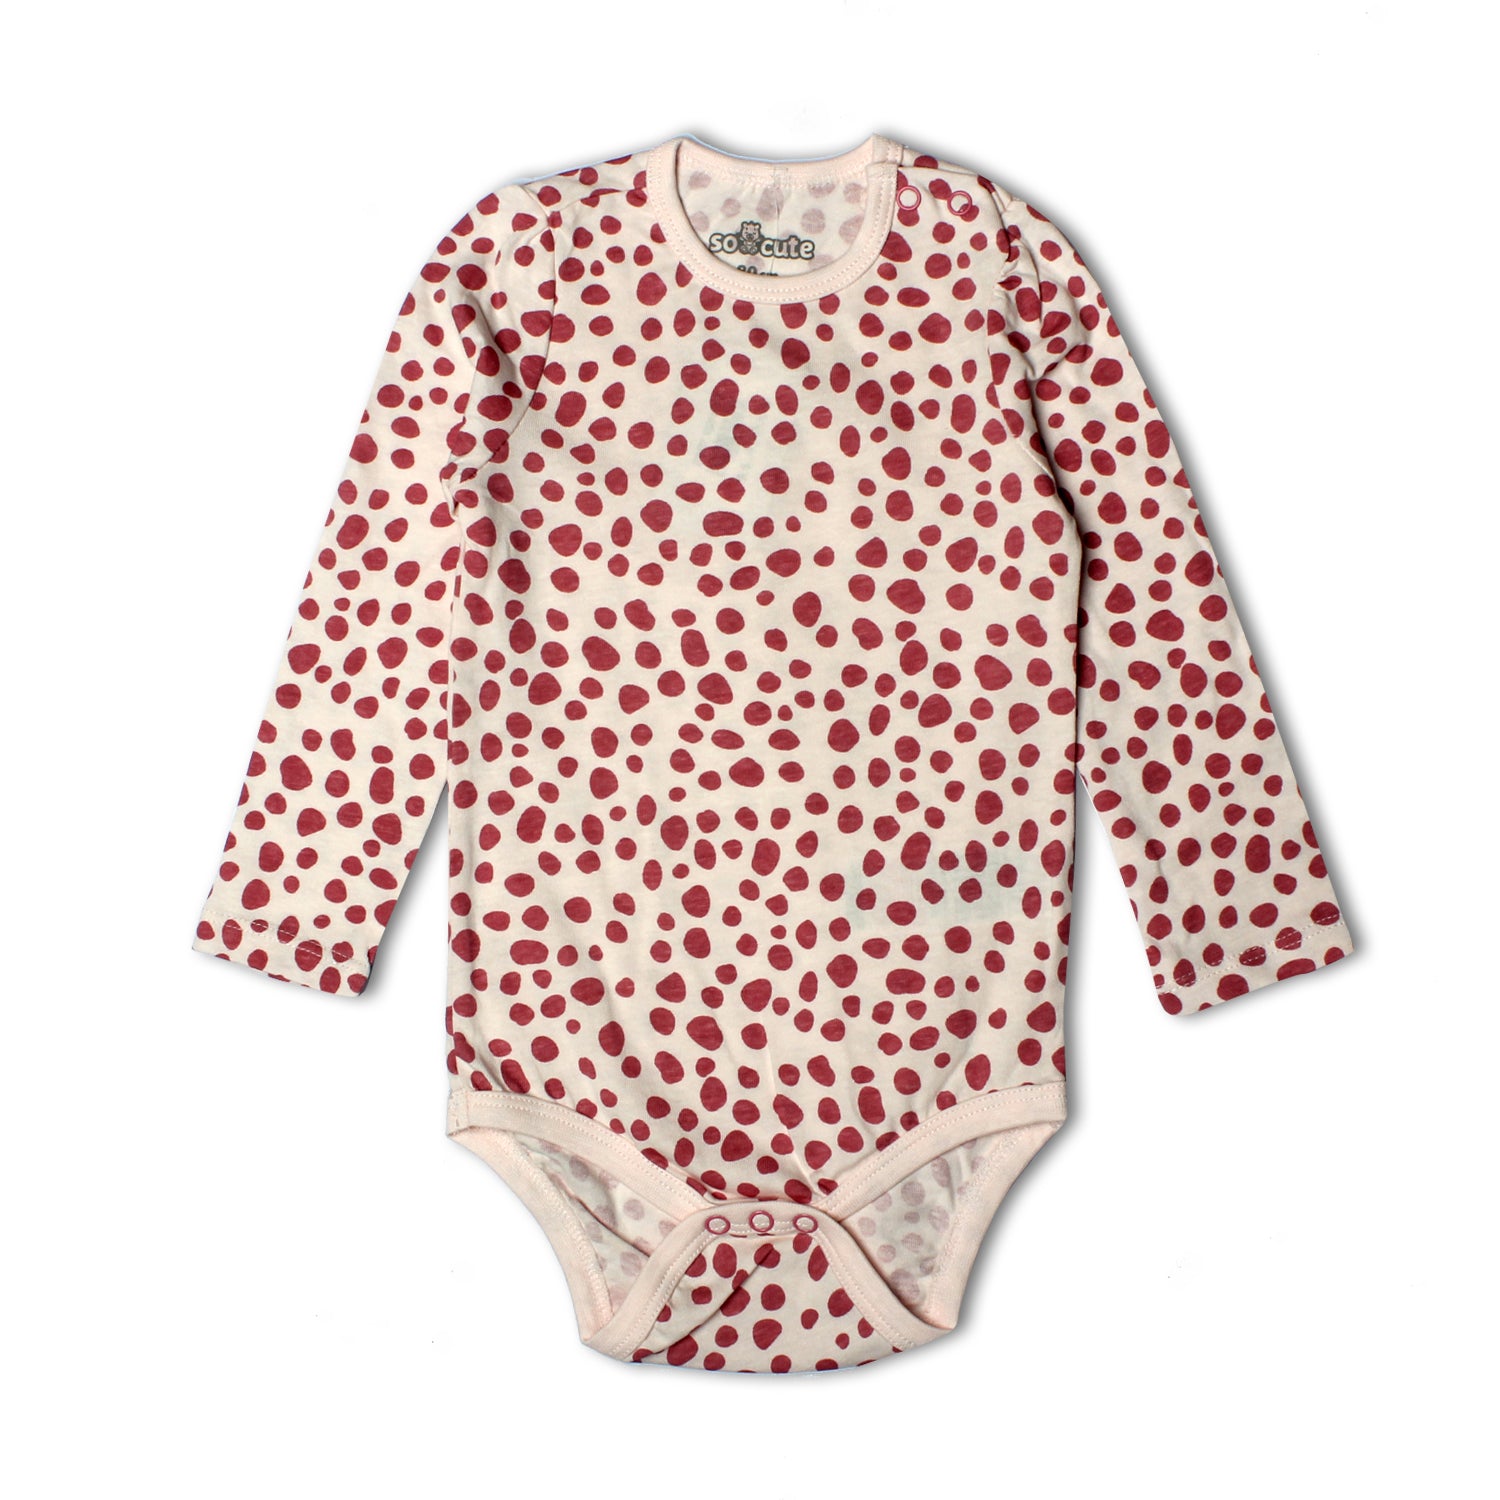 PINK WITH LEOPARD DOTS PRINTED FULL SLEEVES ROMPERS